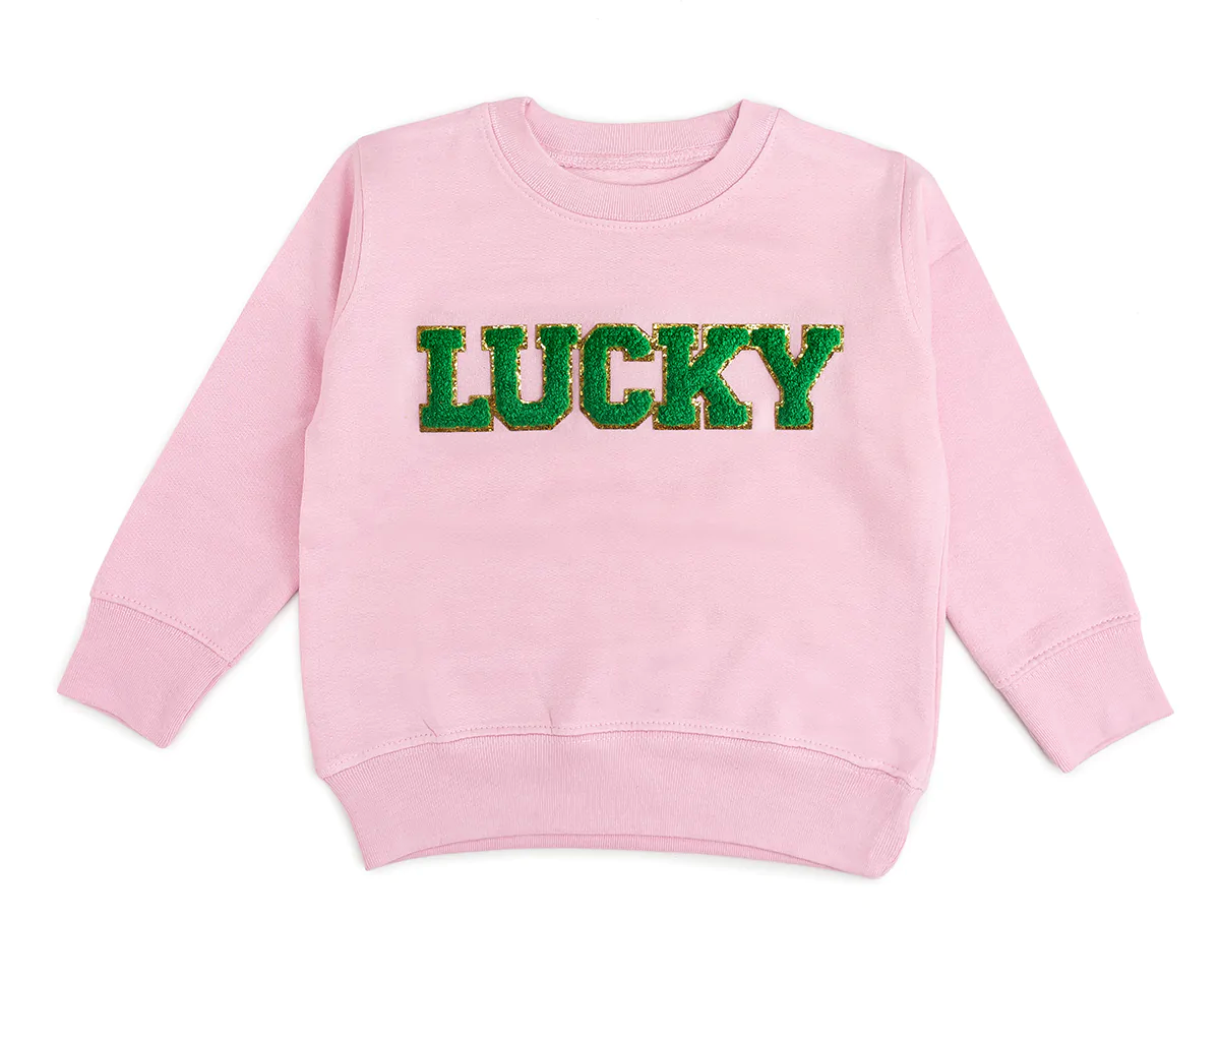 Pink sweatshirt with green and gold LUCKY patch letters by Sweet Wink. 